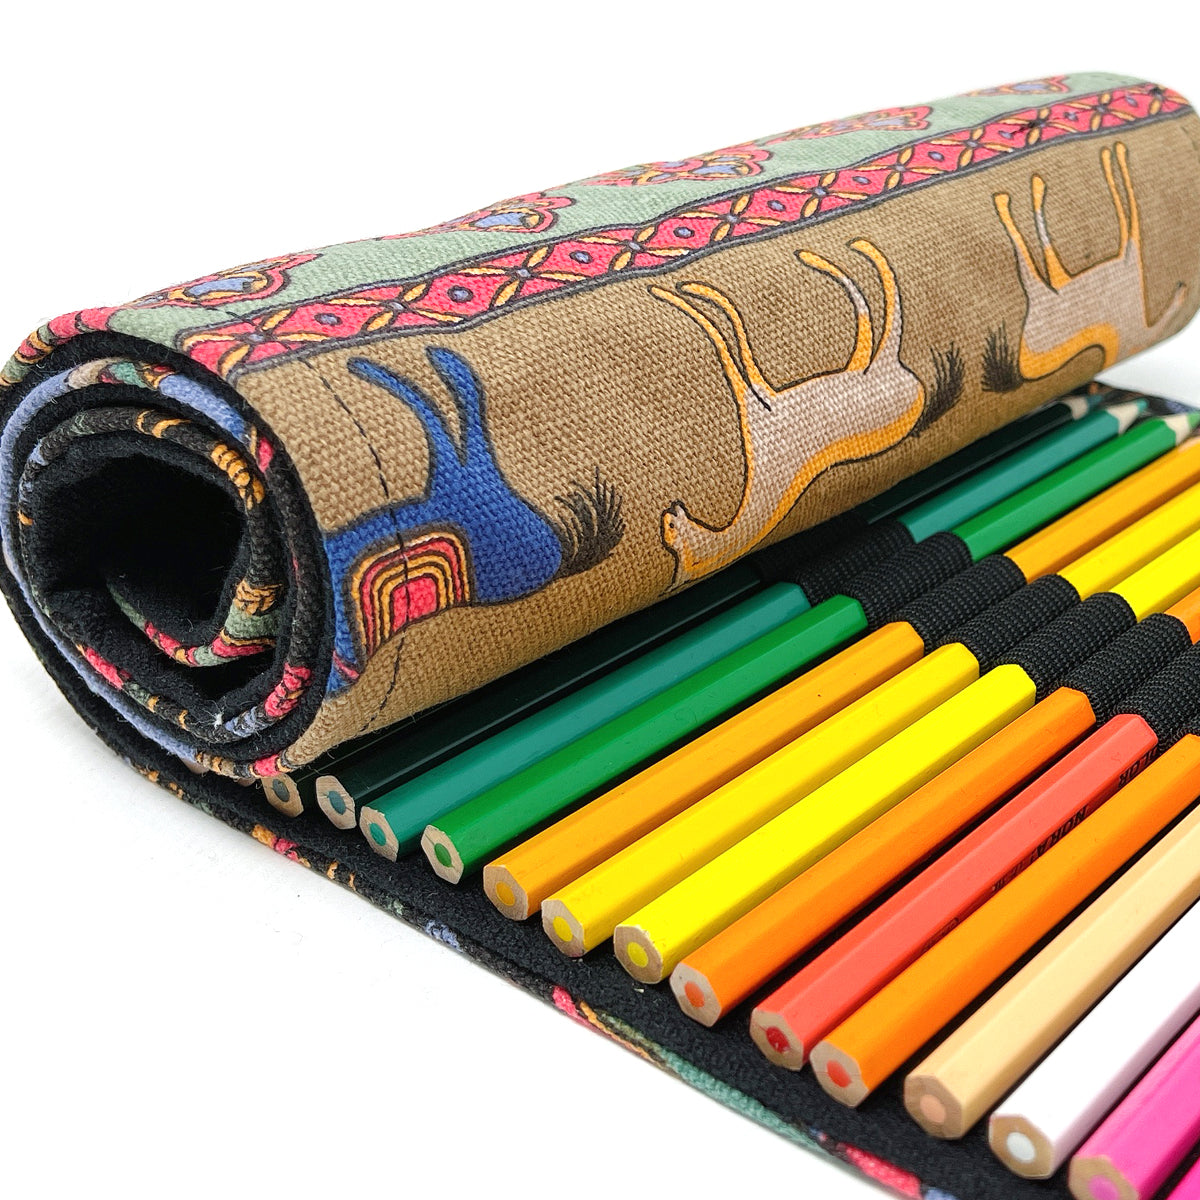 Wrapables Large Capacity 72 Slot Pencil Case for Colored Pencils